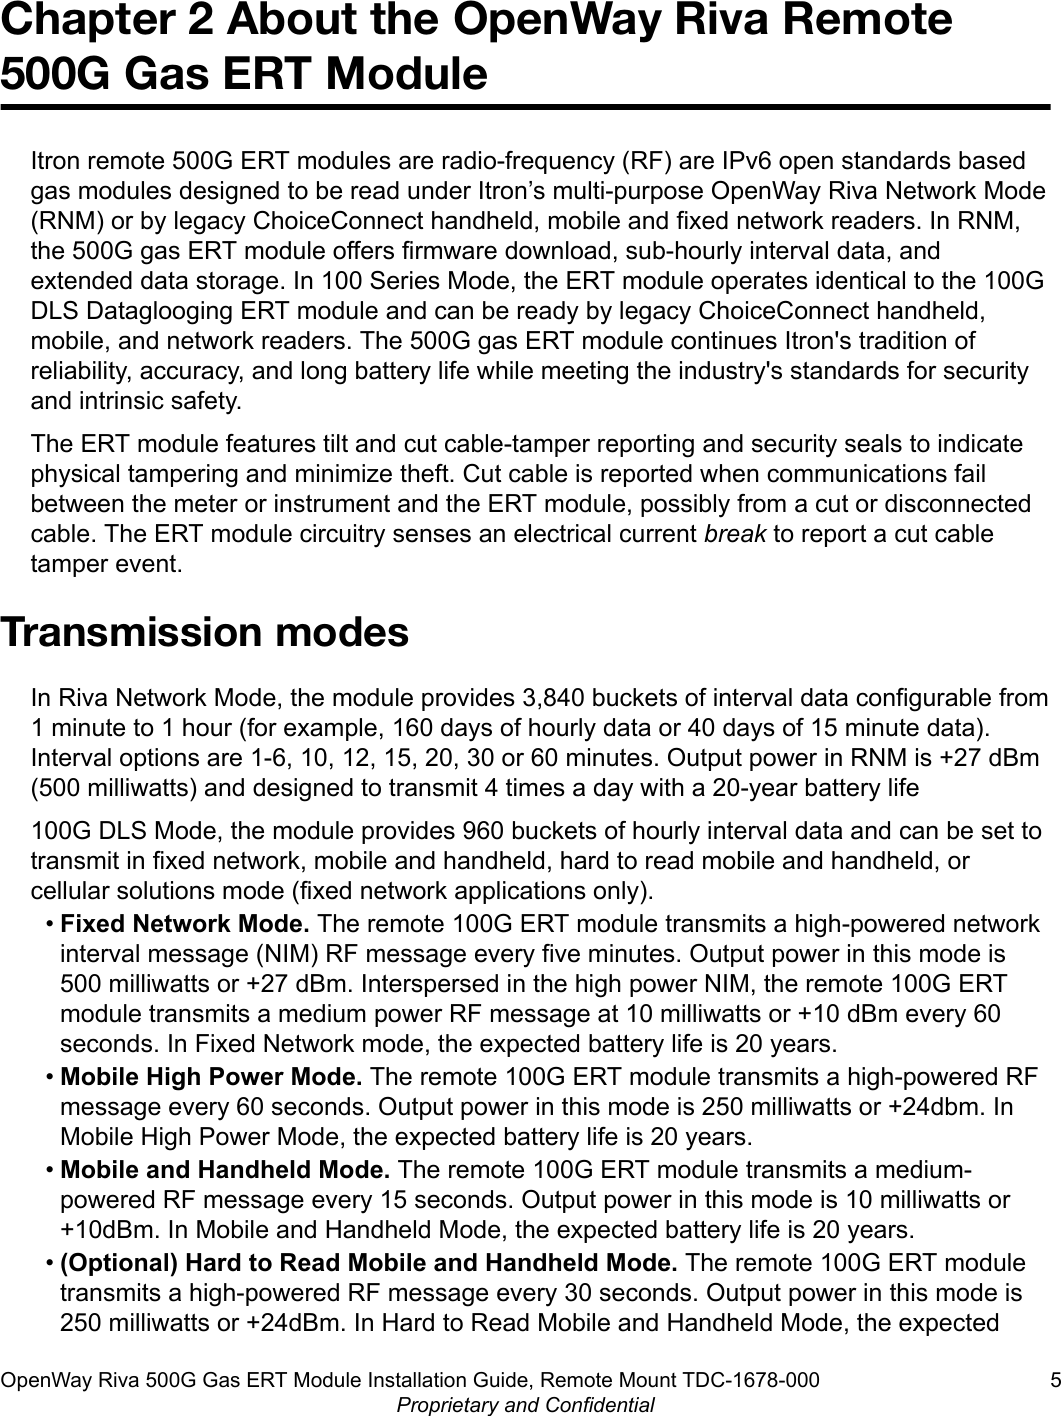 Chapter 2 About the OpenWay Riva Remote500G Gas ERT ModuleItron remote 500G ERT modules are radio-frequency (RF) are IPv6 open standards basedgas modules designed to be read under Itron’s multi-purpose OpenWay Riva Network Mode(RNM) or by legacy ChoiceConnect handheld, mobile and fixed network readers. In RNM,the 500G gas ERT module offers firmware download, sub-hourly interval data, andextended data storage. In 100 Series Mode, the ERT module operates identical to the 100GDLS Dataglooging ERT module and can be ready by legacy ChoiceConnect handheld,mobile, and network readers. The 500G gas ERT module continues Itron&apos;s tradition ofreliability, accuracy, and long battery life while meeting the industry&apos;s standards for securityand intrinsic safety.The ERT module features tilt and cut cable-tamper reporting and security seals to indicatephysical tampering and minimize theft. Cut cable is reported when communications failbetween the meter or instrument and the ERT module, possibly from a cut or disconnectedcable. The ERT module circuitry senses an electrical current break to report a cut cabletamper event.Transmission modesIn Riva Network Mode, the module provides 3,840 buckets of interval data configurable from1 minute to 1 hour (for example, 160 days of hourly data or 40 days of 15 minute data).Interval options are 1-6, 10, 12, 15, 20, 30 or 60 minutes. Output power in RNM is +27 dBm(500 milliwatts) and designed to transmit 4 times a day with a 20-year battery life100G DLS Mode, the module provides 960 buckets of hourly interval data and can be set totransmit in fixed network, mobile and handheld, hard to read mobile and handheld, orcellular solutions mode (fixed network applications only).•Fixed Network Mode. The remote 100G ERT module transmits a high-powered networkinterval message (NIM) RF message every five minutes. Output power in this mode is500 milliwatts or +27 dBm. Interspersed in the high power NIM, the remote 100G ERTmodule transmits a medium power RF message at 10 milliwatts or +10 dBm every 60seconds. In Fixed Network mode, the expected battery life is 20 years.•Mobile High Power Mode. The remote 100G ERT module transmits a high-powered RFmessage every 60 seconds. Output power in this mode is 250 milliwatts or +24dbm. InMobile High Power Mode, the expected battery life is 20 years.•Mobile and Handheld Mode. The remote 100G ERT module transmits a medium-powered RF message every 15 seconds. Output power in this mode is 10 milliwatts or+10dBm. In Mobile and Handheld Mode, the expected battery life is 20 years.•(Optional) Hard to Read Mobile and Handheld Mode. The remote 100G ERT moduletransmits a high-powered RF message every 30 seconds. Output power in this mode is250 milliwatts or +24dBm. In Hard to Read Mobile and Handheld Mode, the expectedOpenWay Riva 500G Gas ERT Module Installation Guide, Remote Mount TDC-1678-000 5Proprietary and Confidential